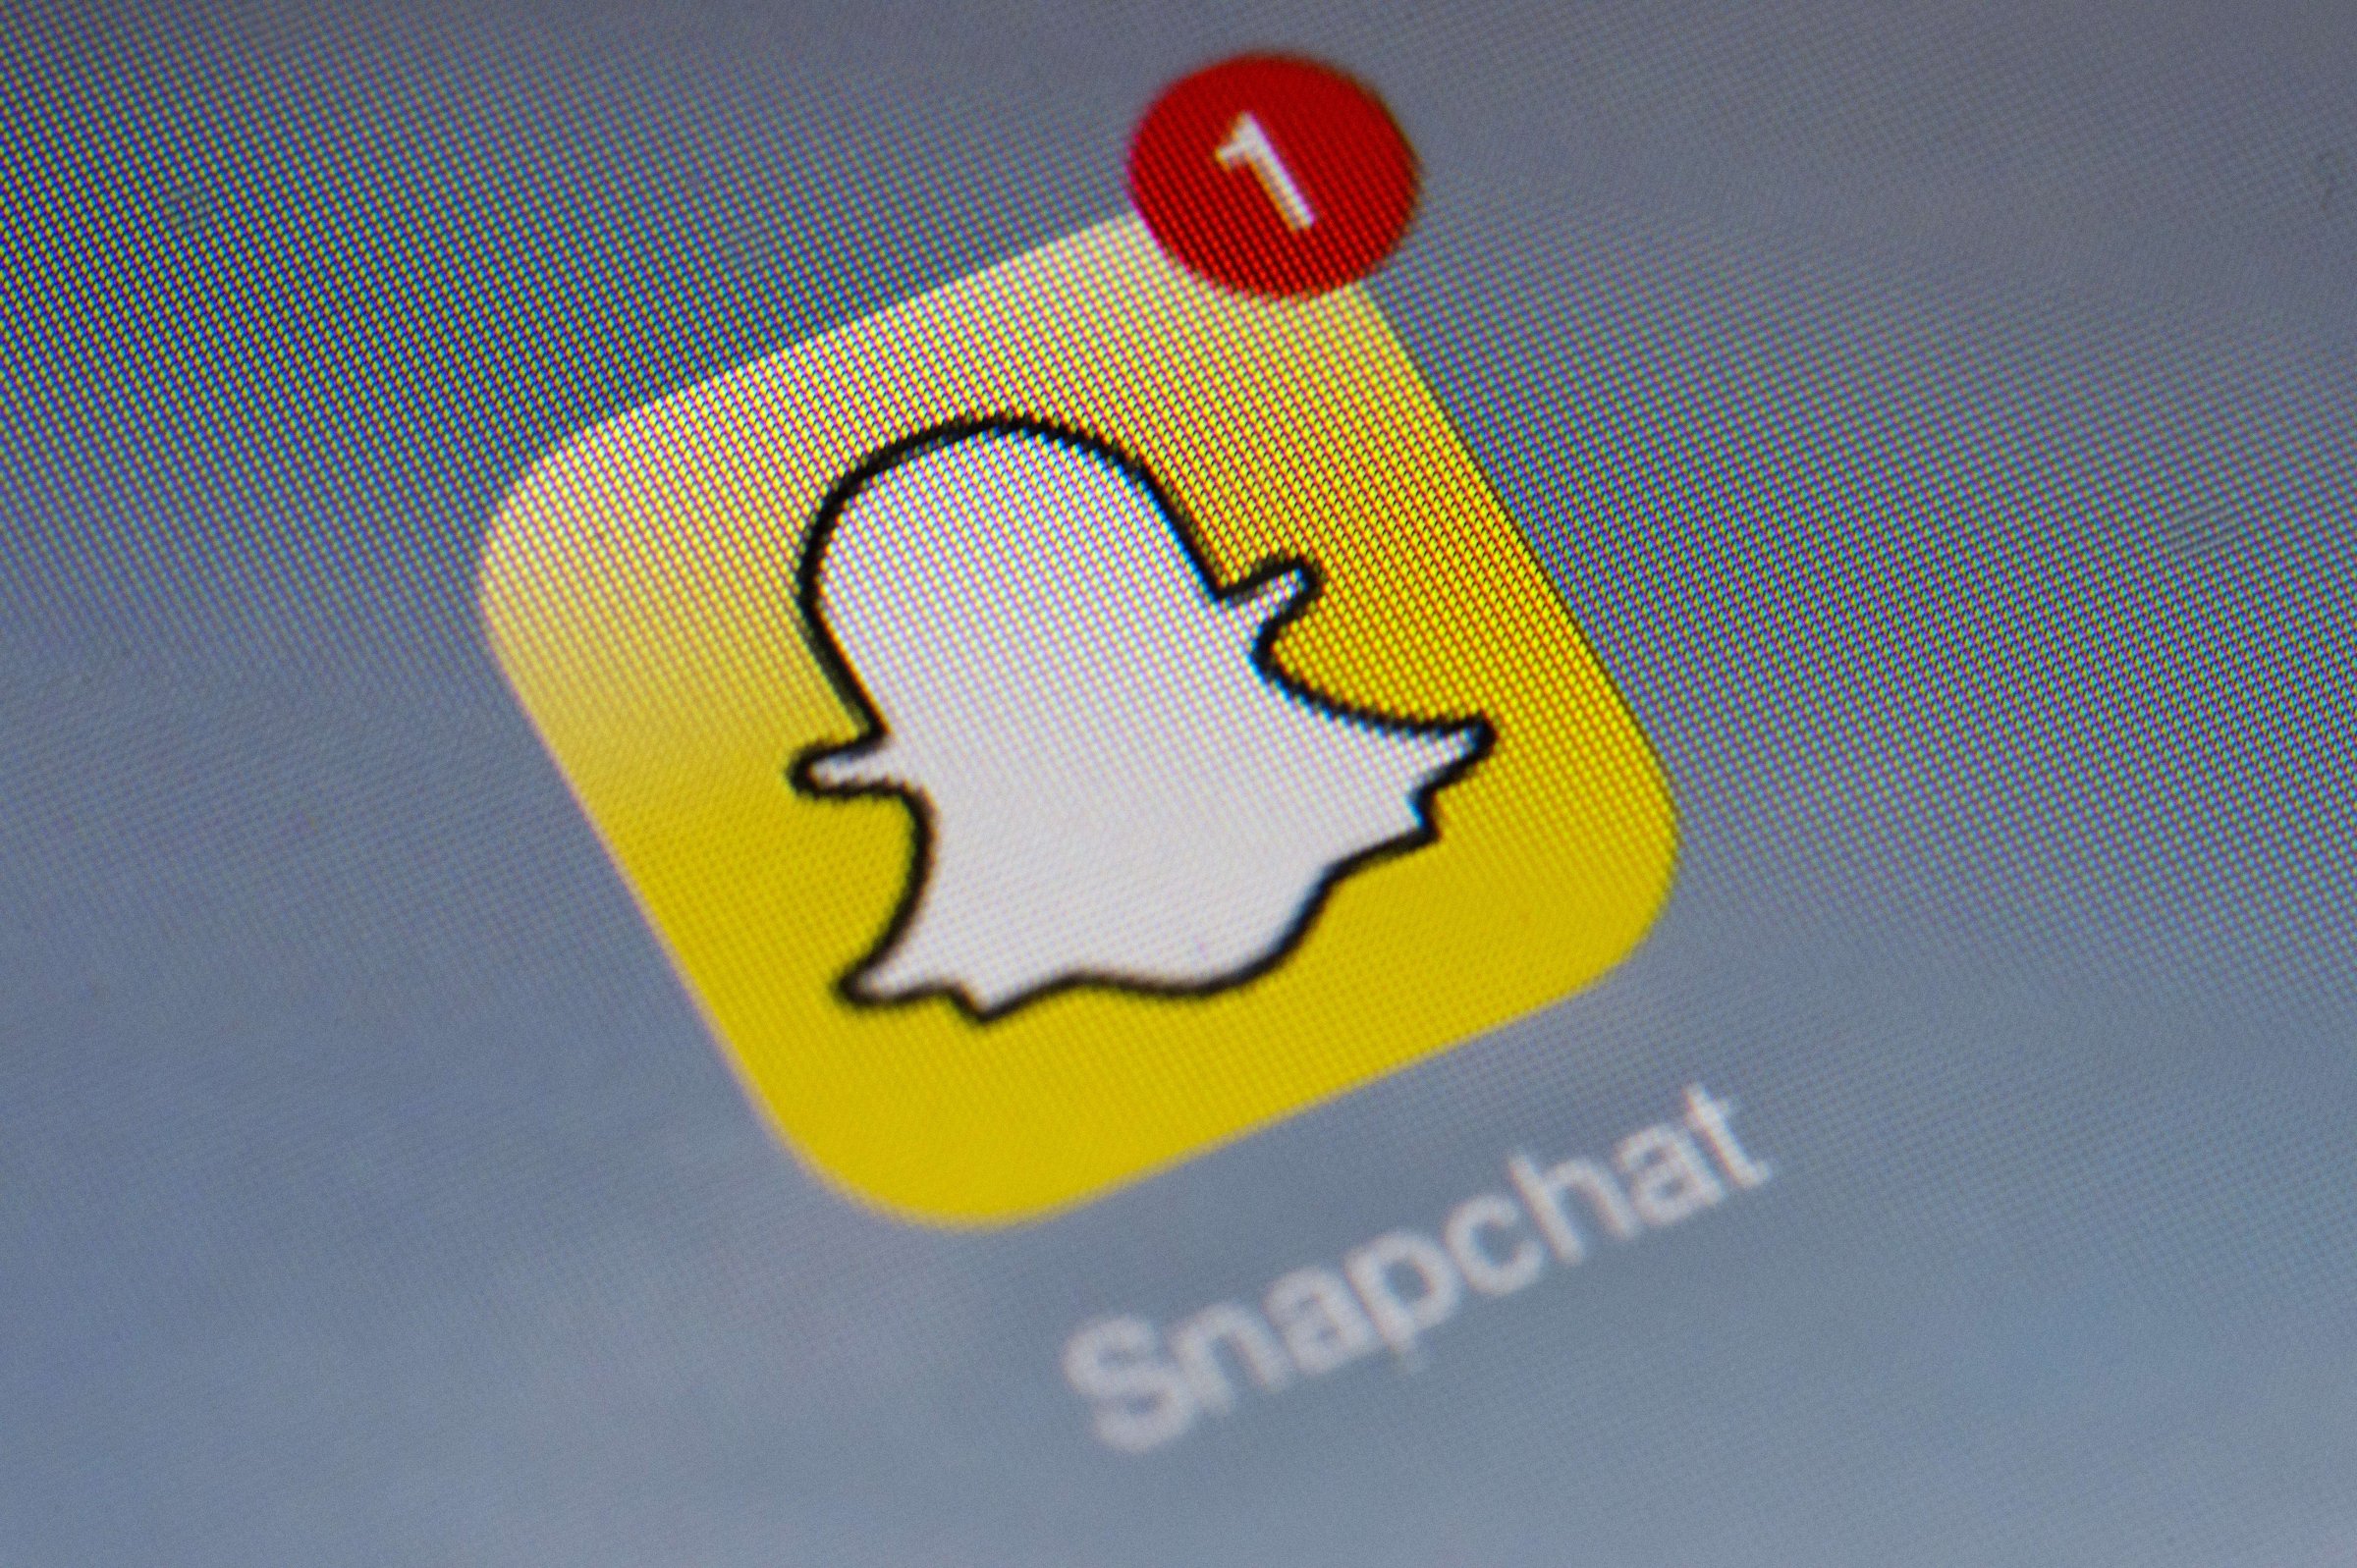 The logo of mobile app "Snapchat" is displayed on a tablet on January 2, 2014 in Paris.